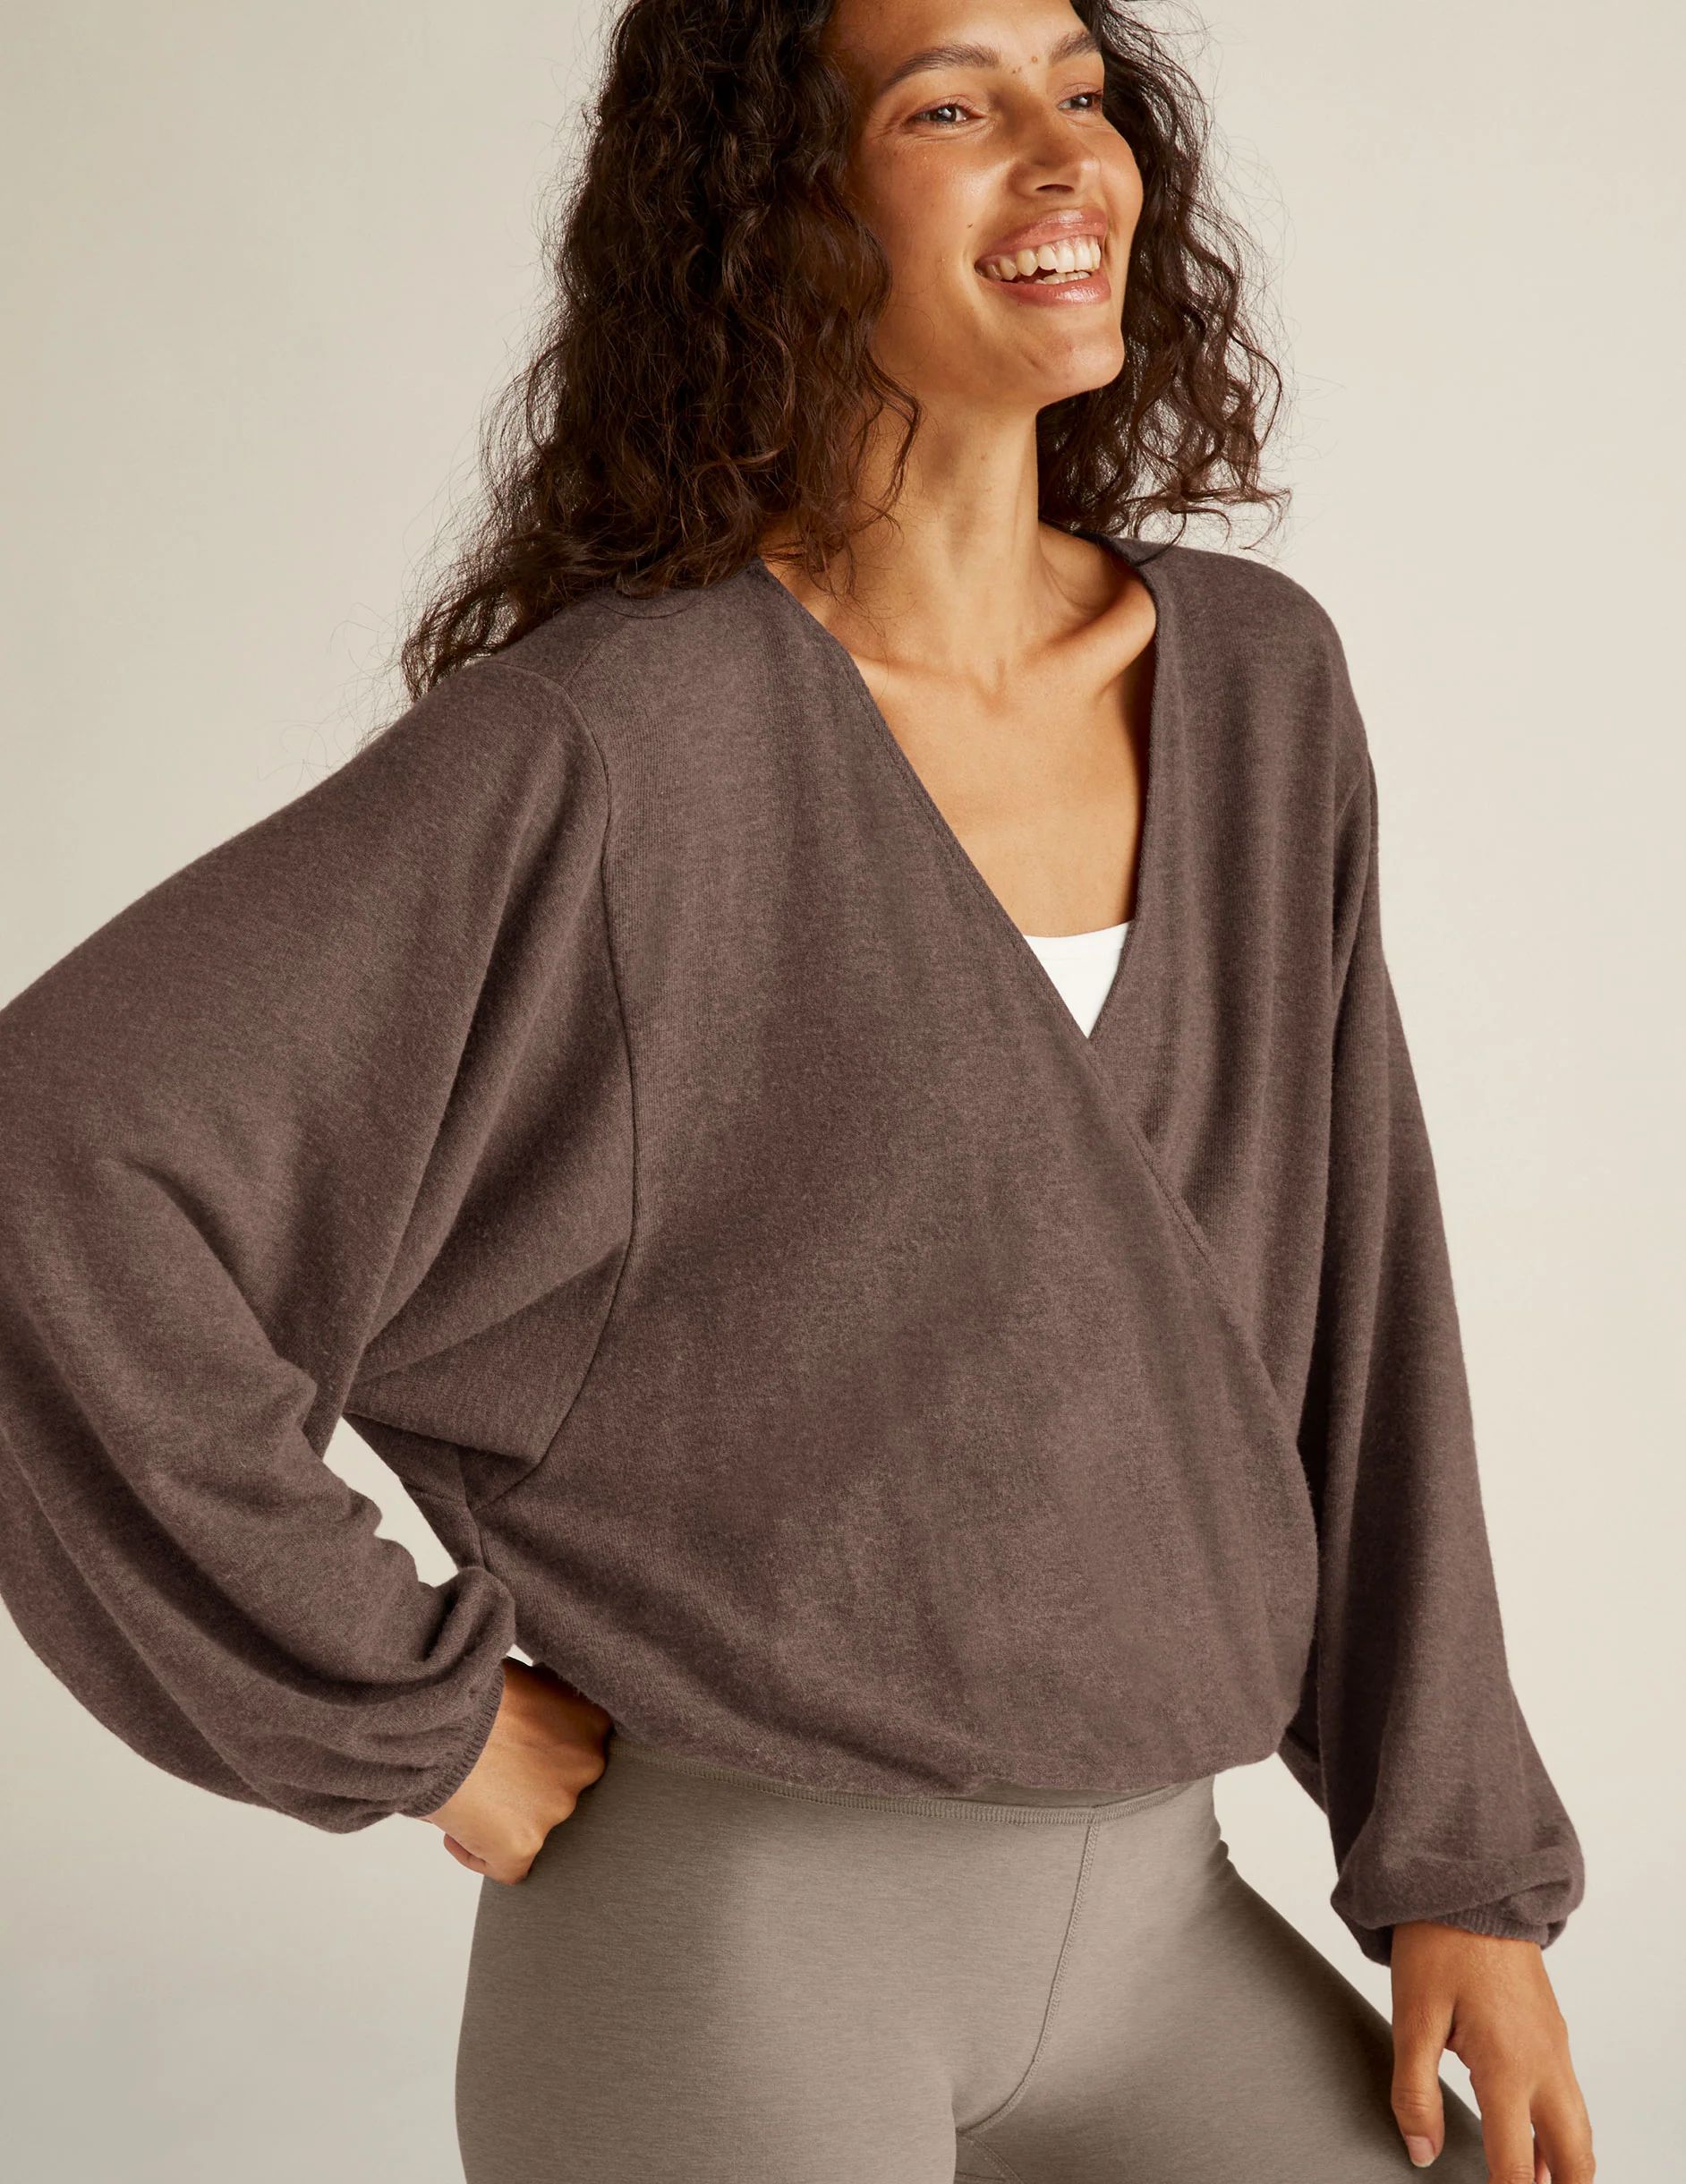 Wrapped Up Pullover | Beyond Yoga | Beyond Yoga